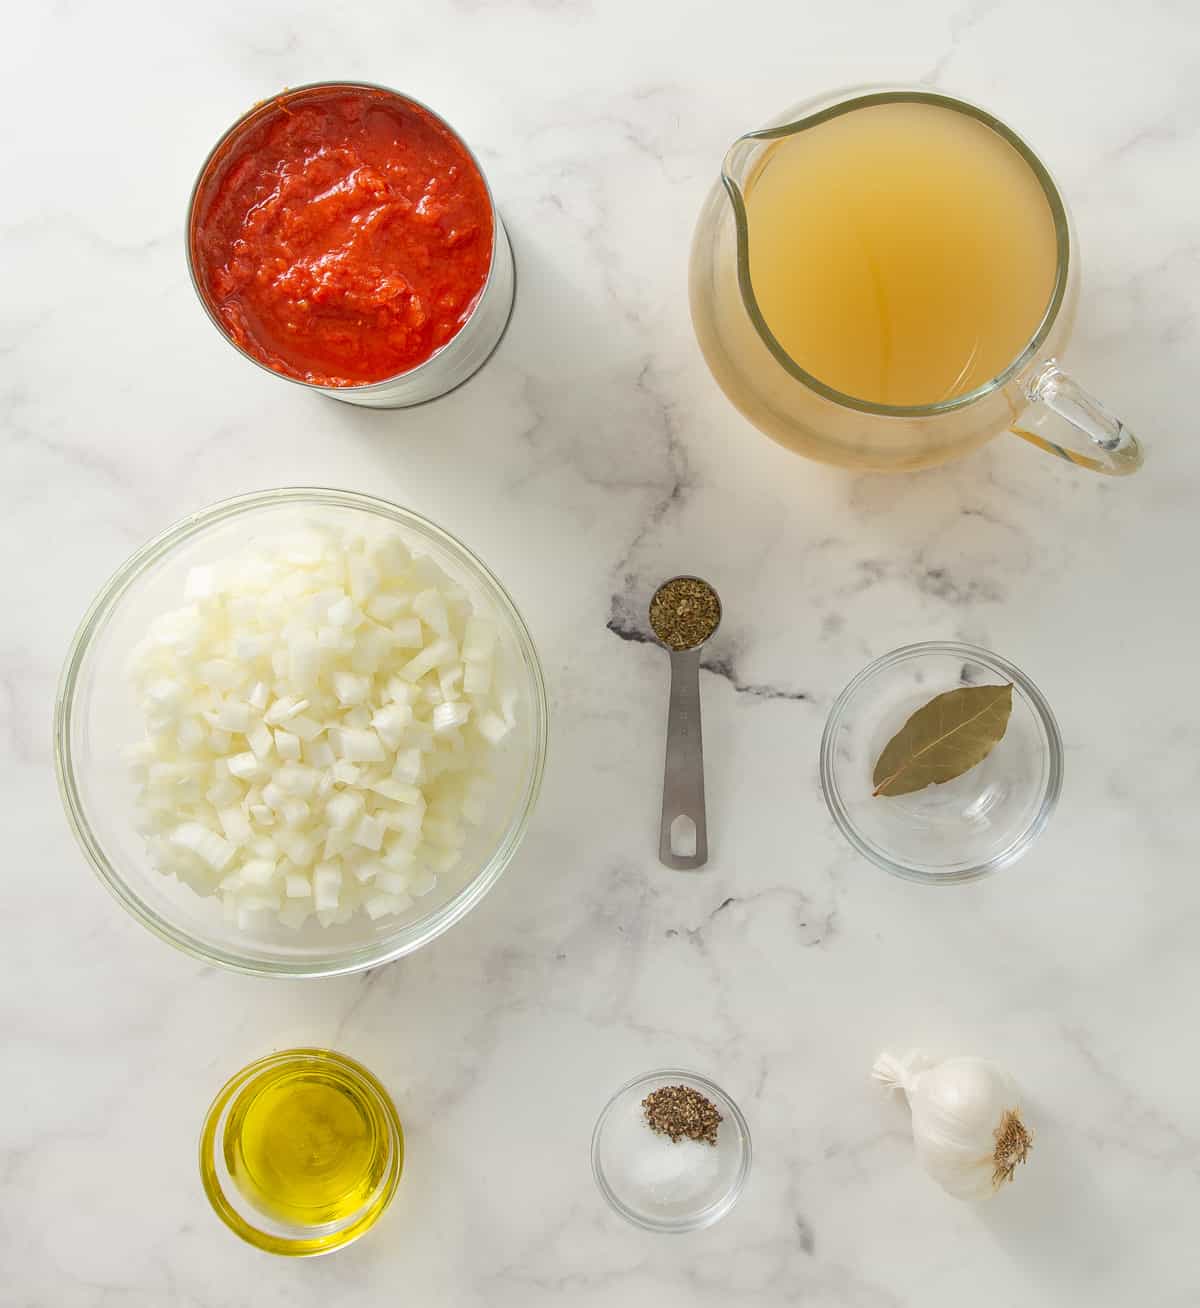 Overhead view of ingredients for tomato soup on a white marble surface.